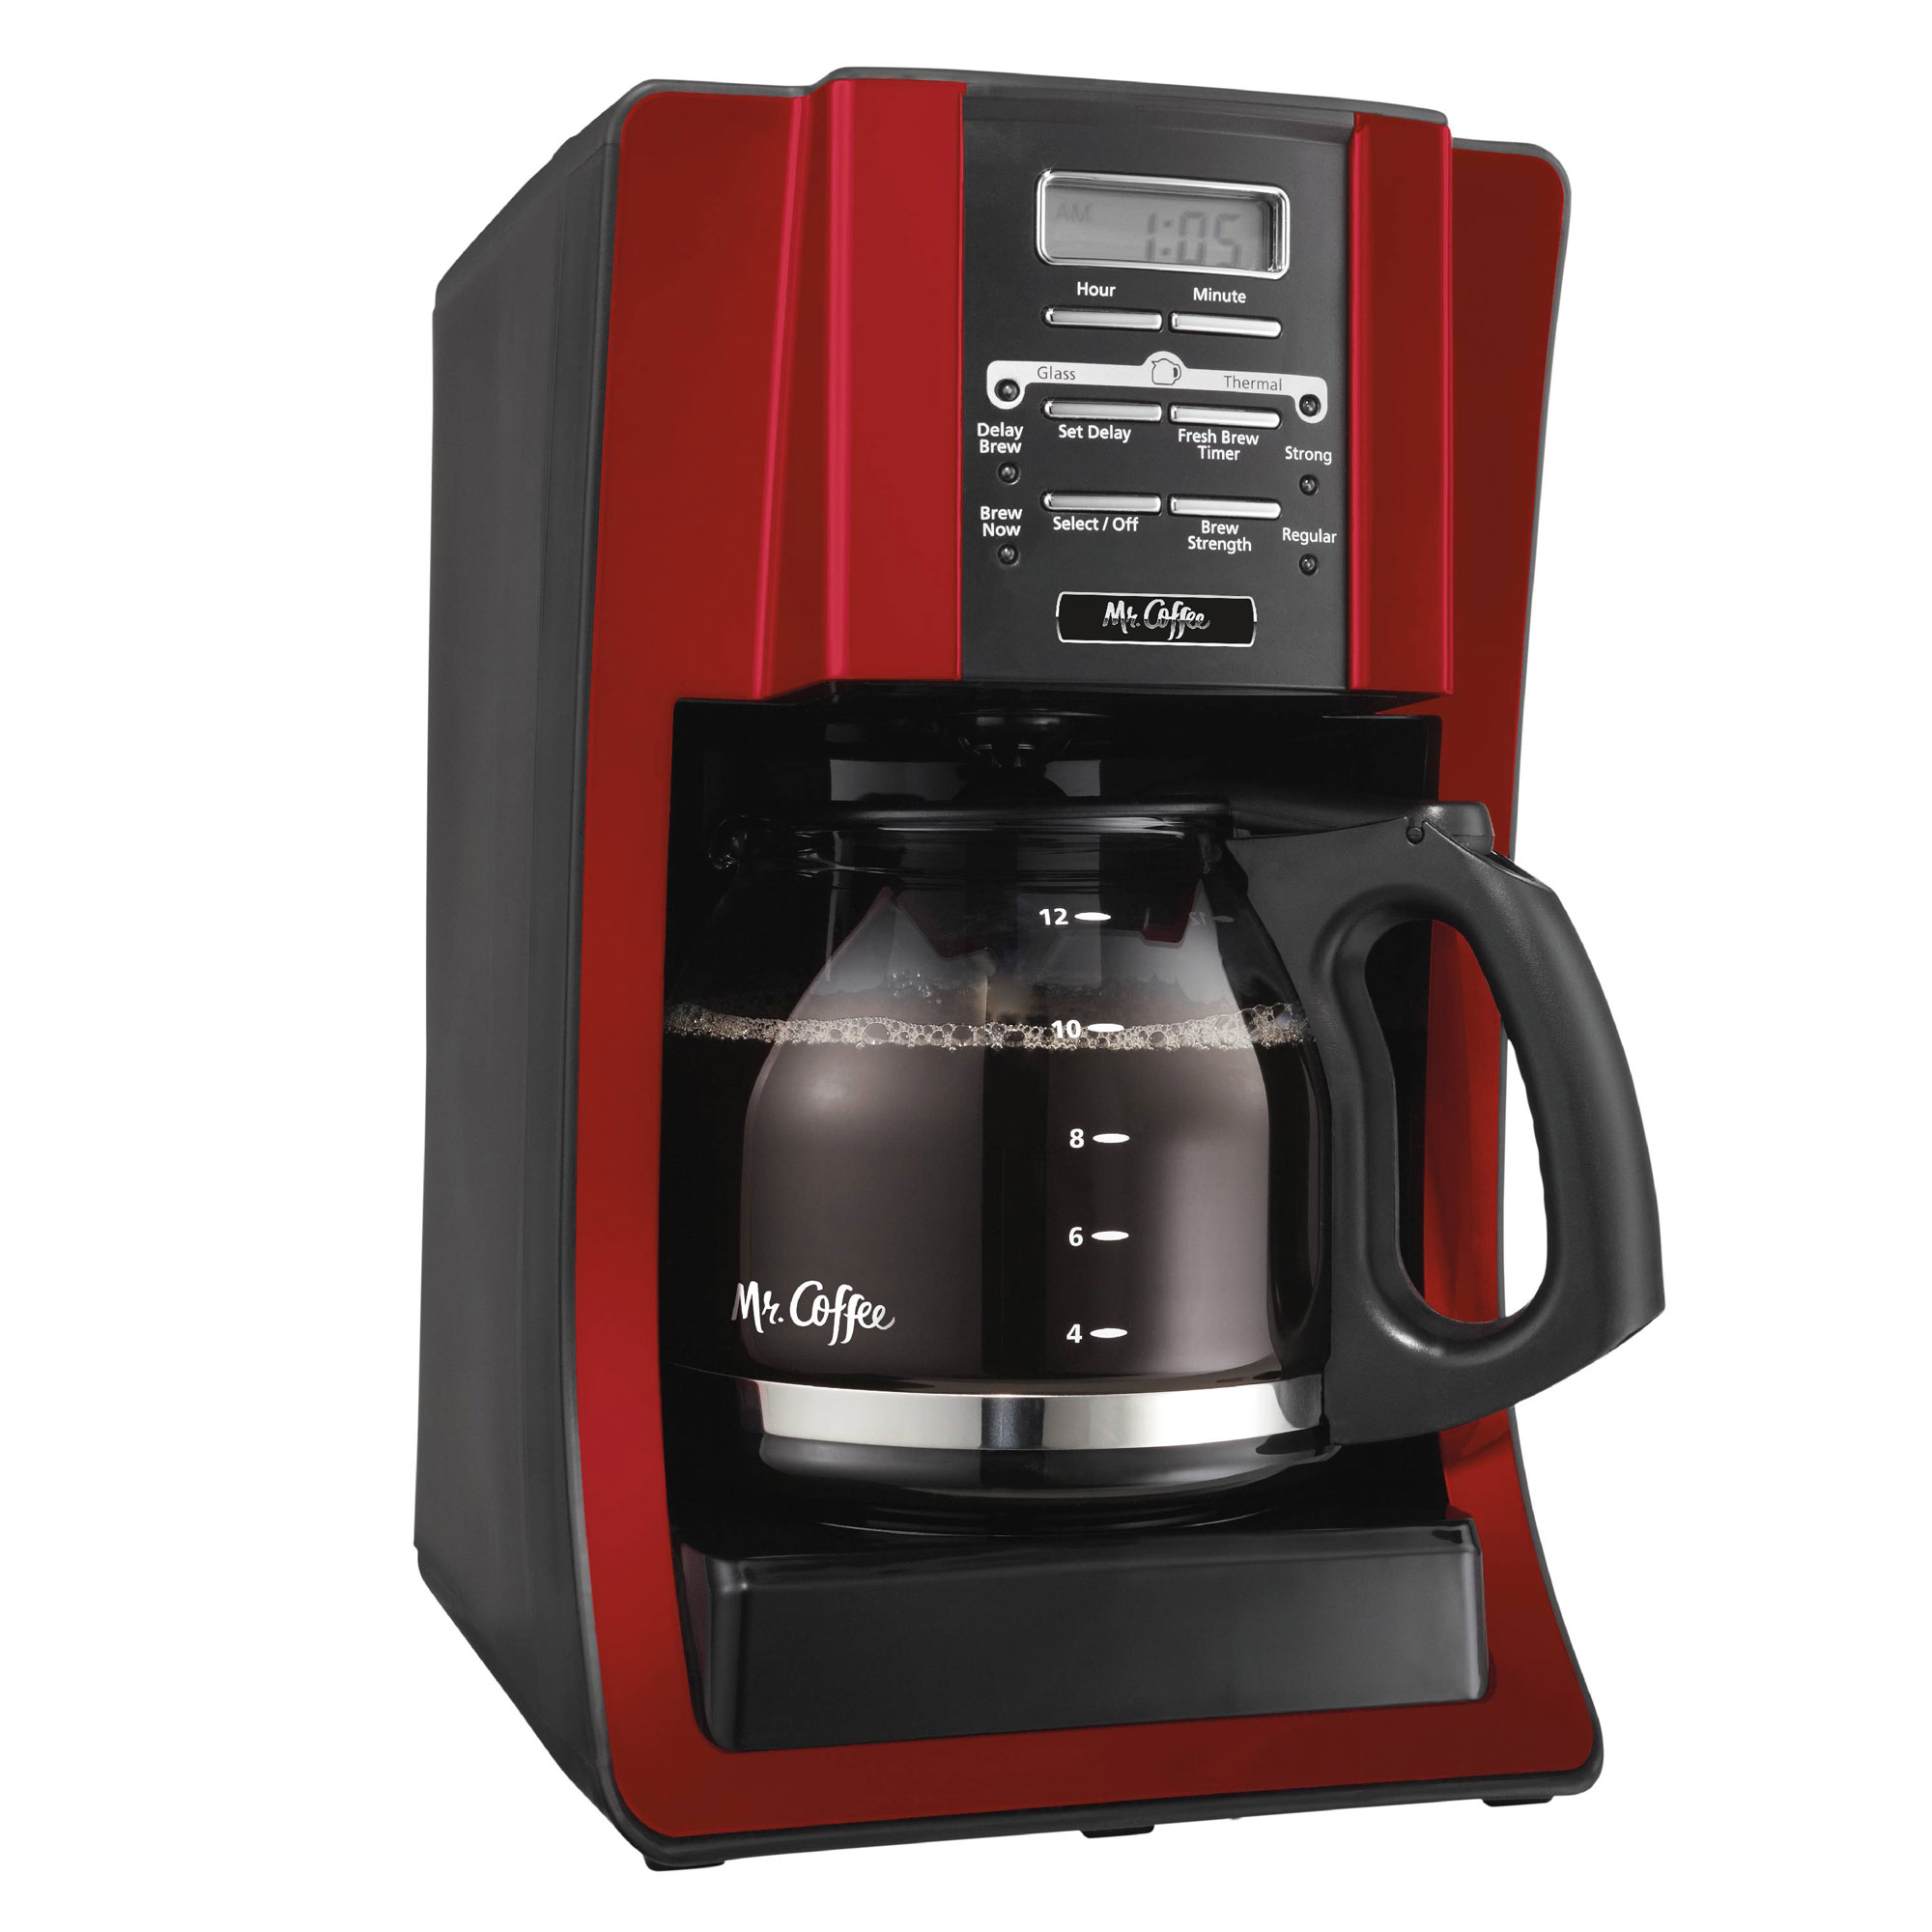 Mr. Coffee BVMCSJX36RB Advanced 12 Cup Programmable Digital Coffee Maker, Red - image 1 of 3